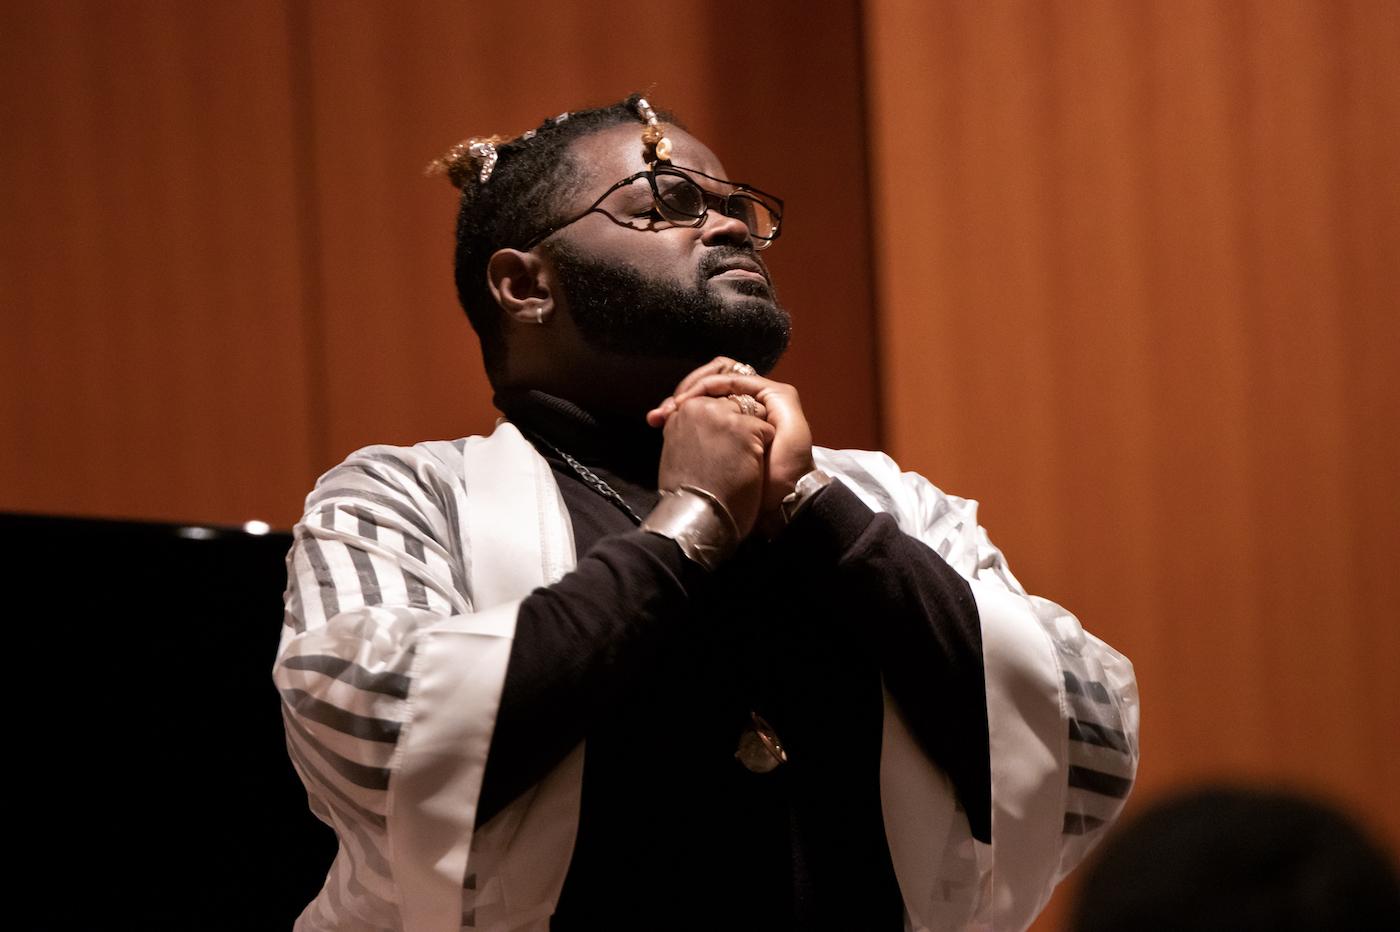 John Holiday clasps his hands as he sings during Thursday's tribute to Martin Luther King Jr.